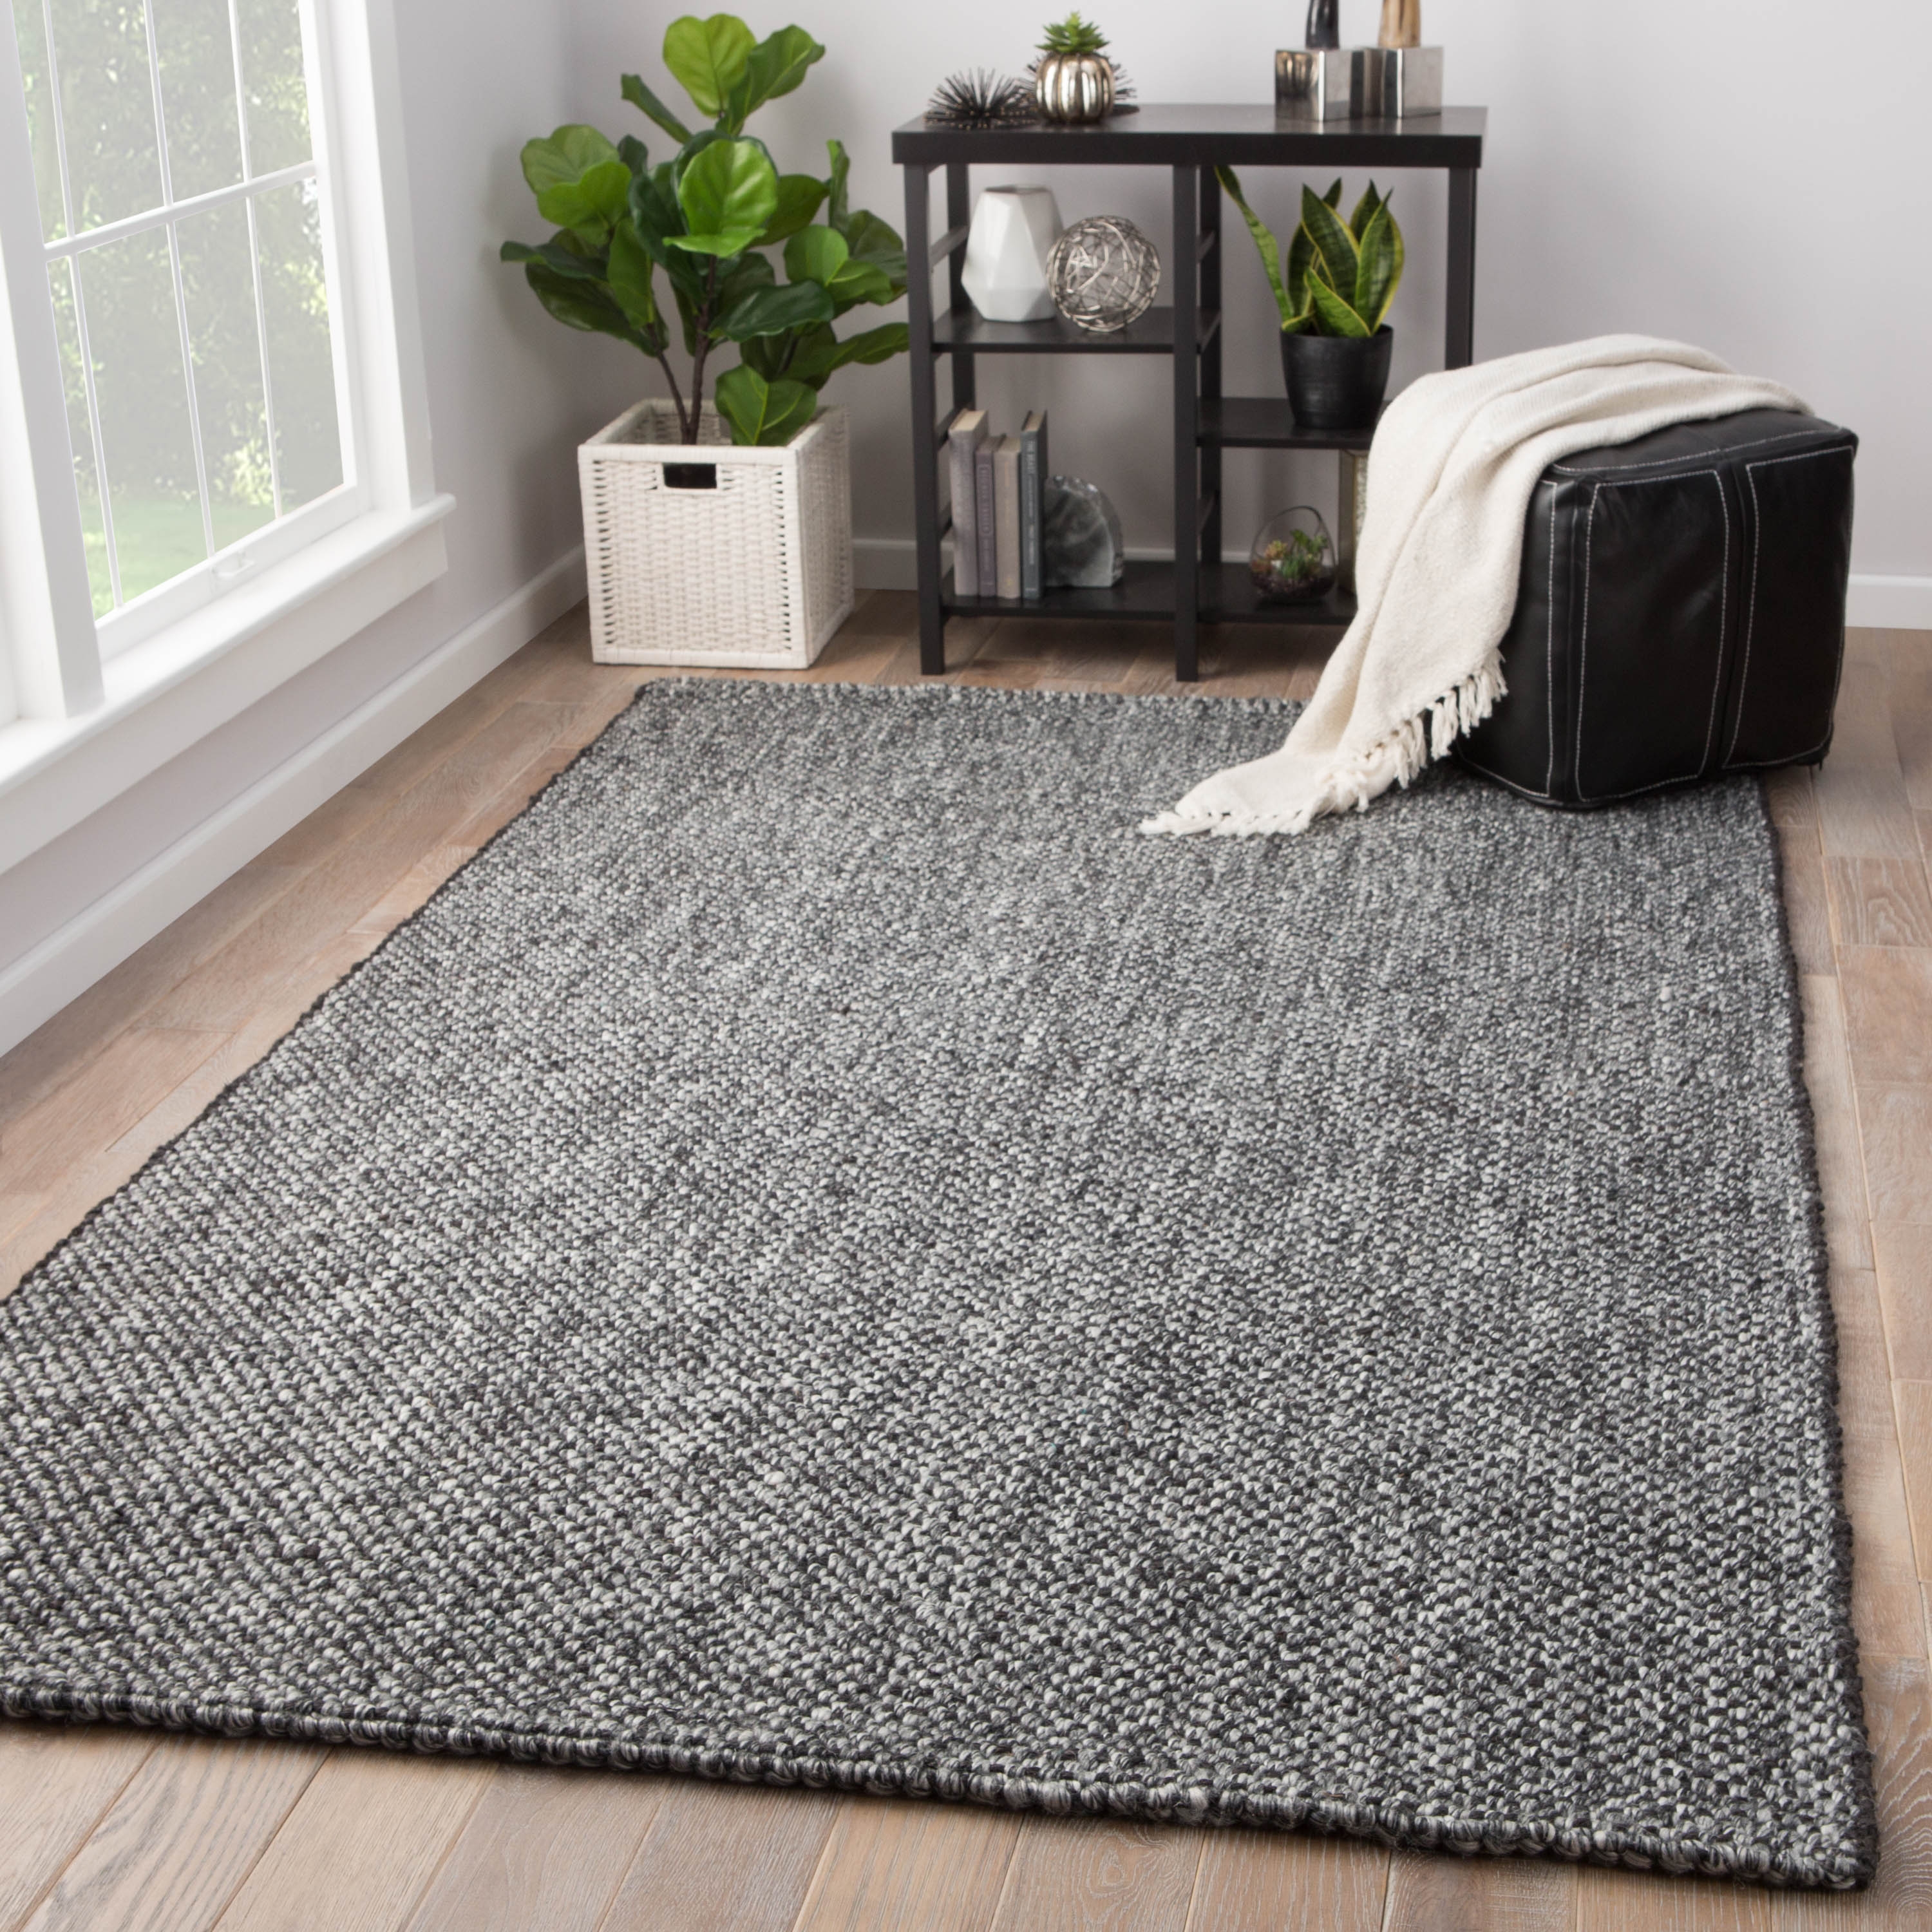 Topper Handmade Solid Black/ Gray Area Rug (5' X 8') - Image 4